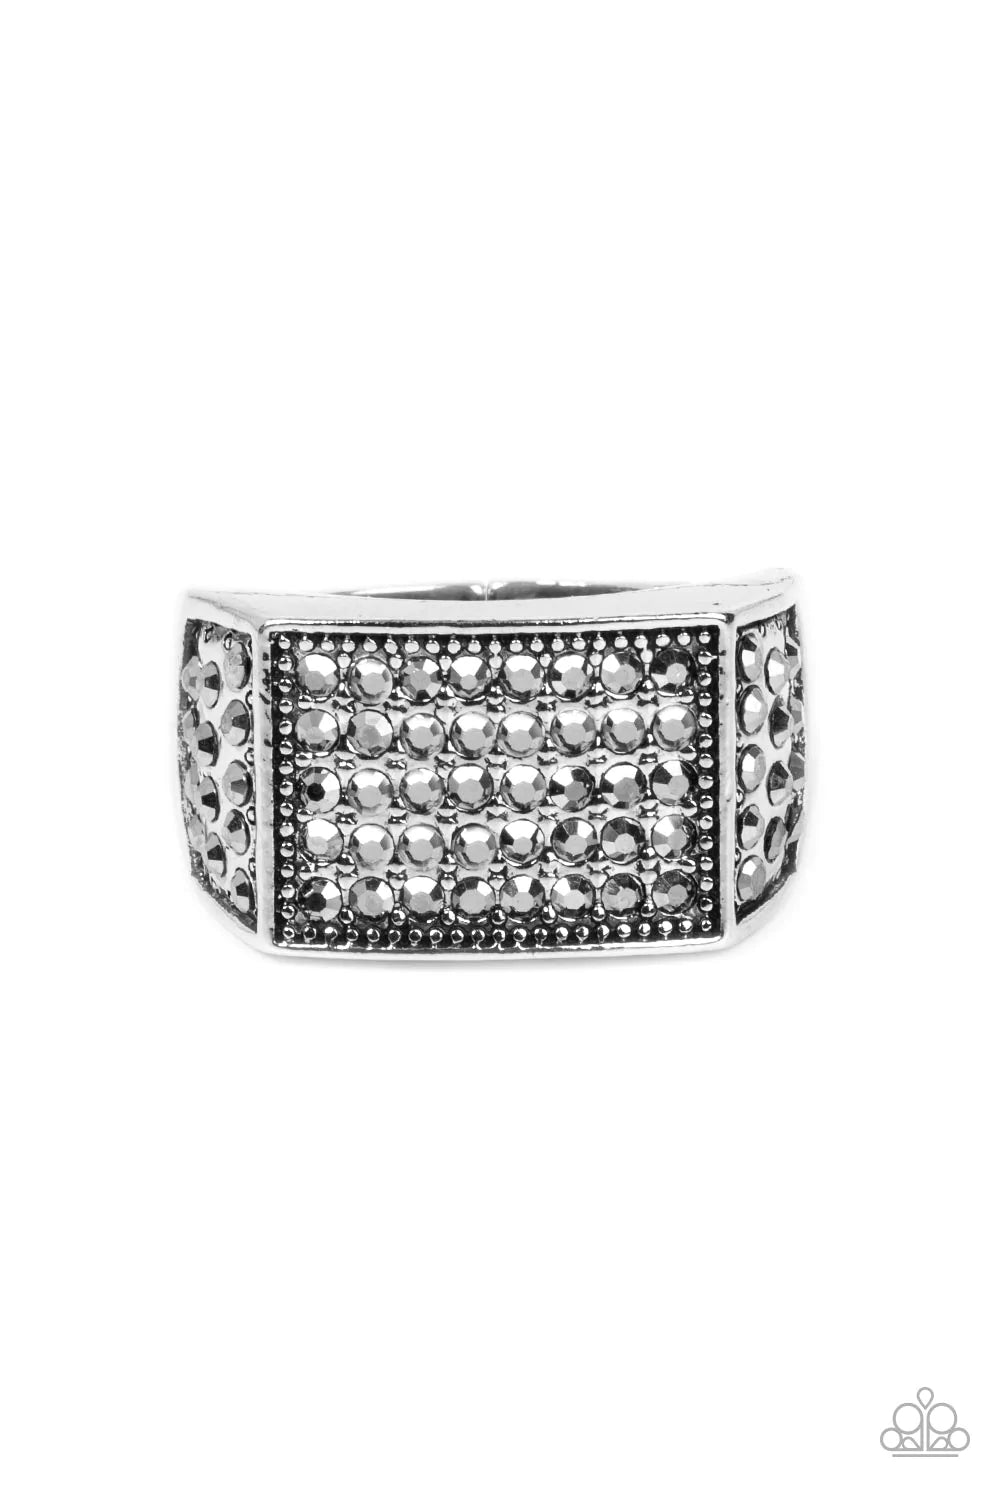 Paparazzi Accessories Metro Merger - Silver The front of a rectangular silver frame is encrusted in sections of hematite rhinestones, resulting in a smoldering centerpiece atop the finger. Features a stretchy band for a flexible fit. Sold as one individua